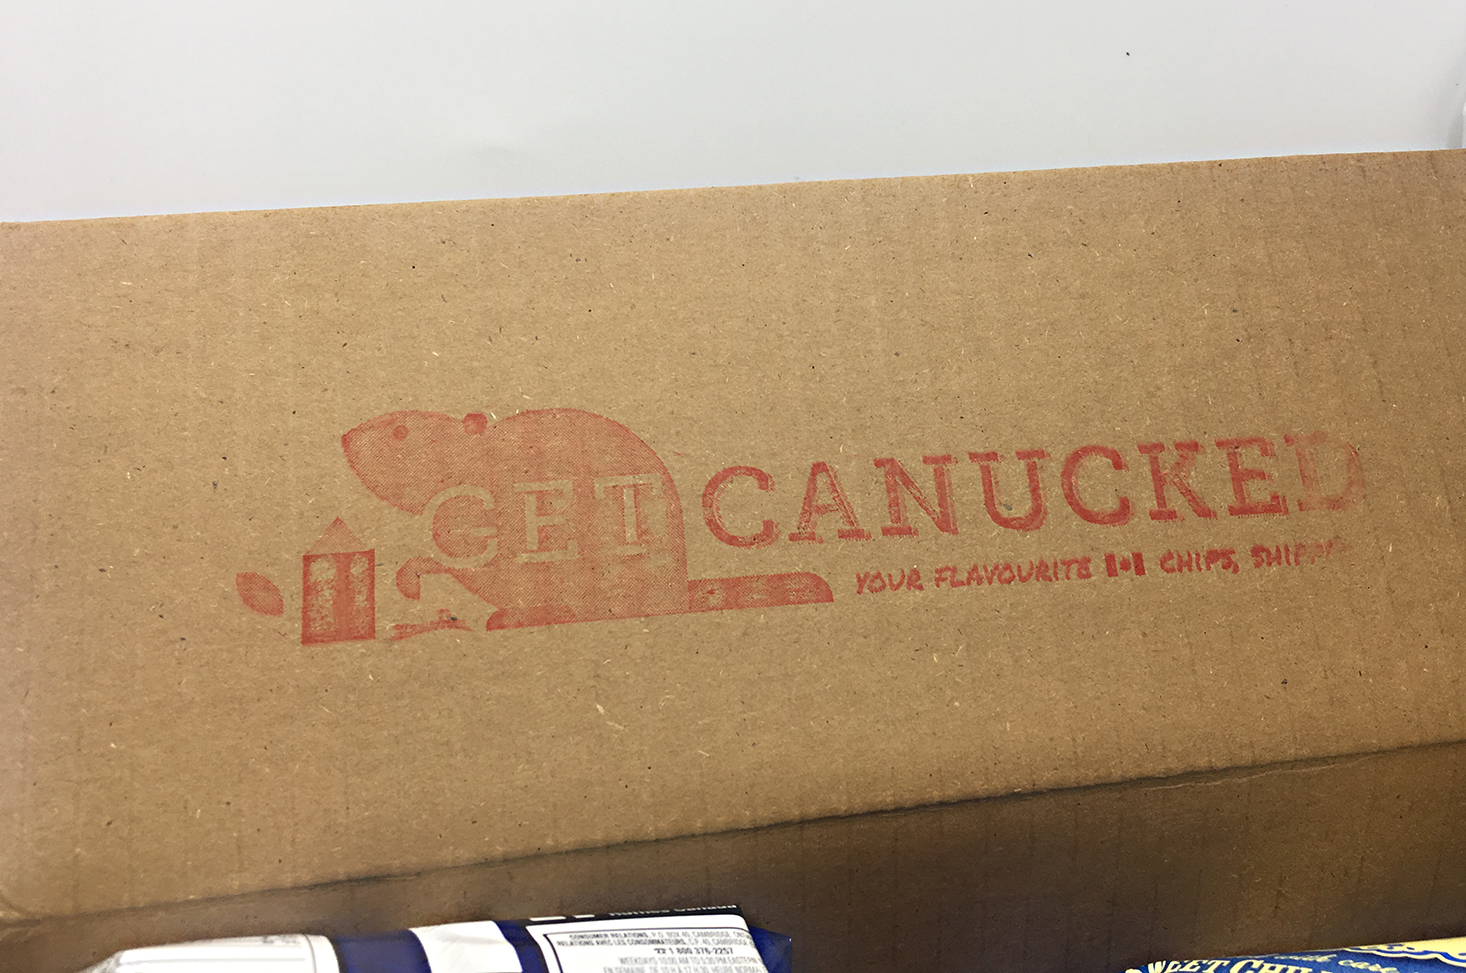 Get-Canucked-January-2017-First-Look